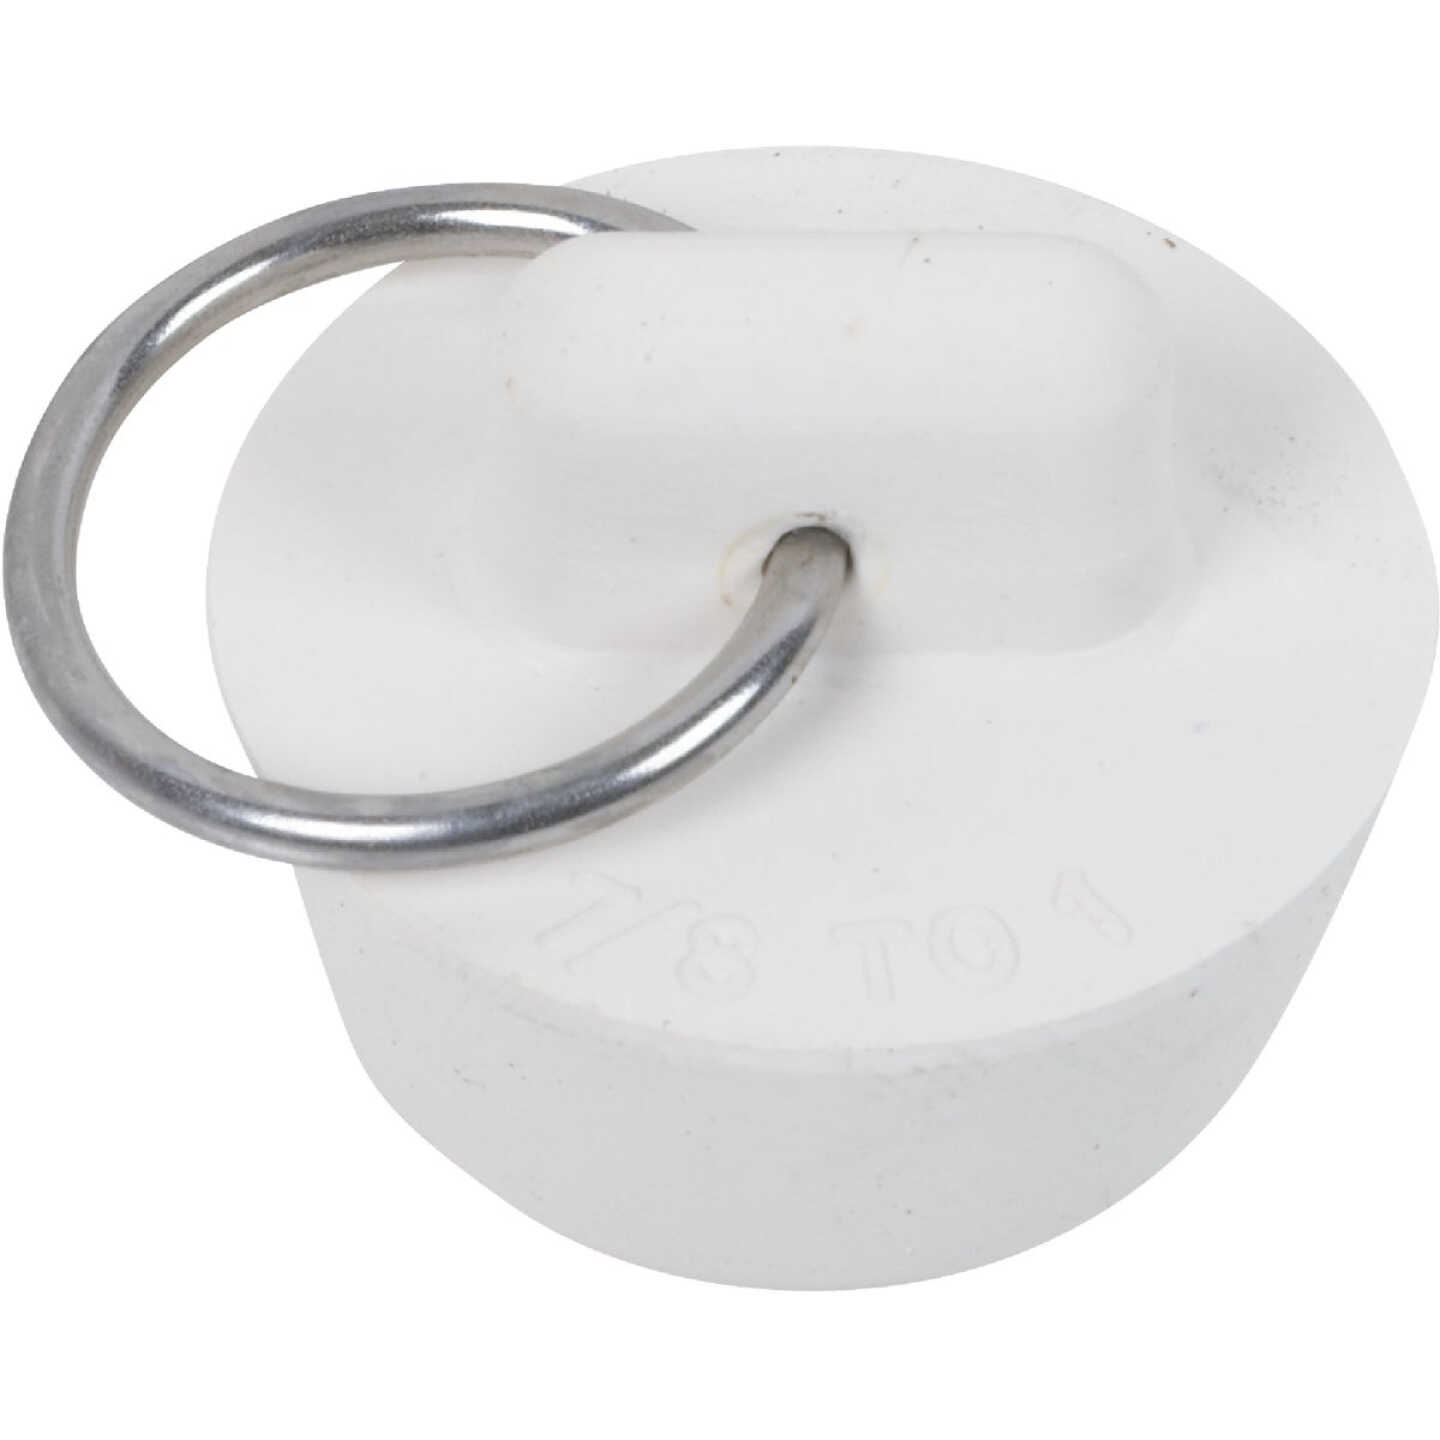 Do it Duo-Fit 7/8 In. to 1 In. White Sink Rubber Drain Stopper Image 1